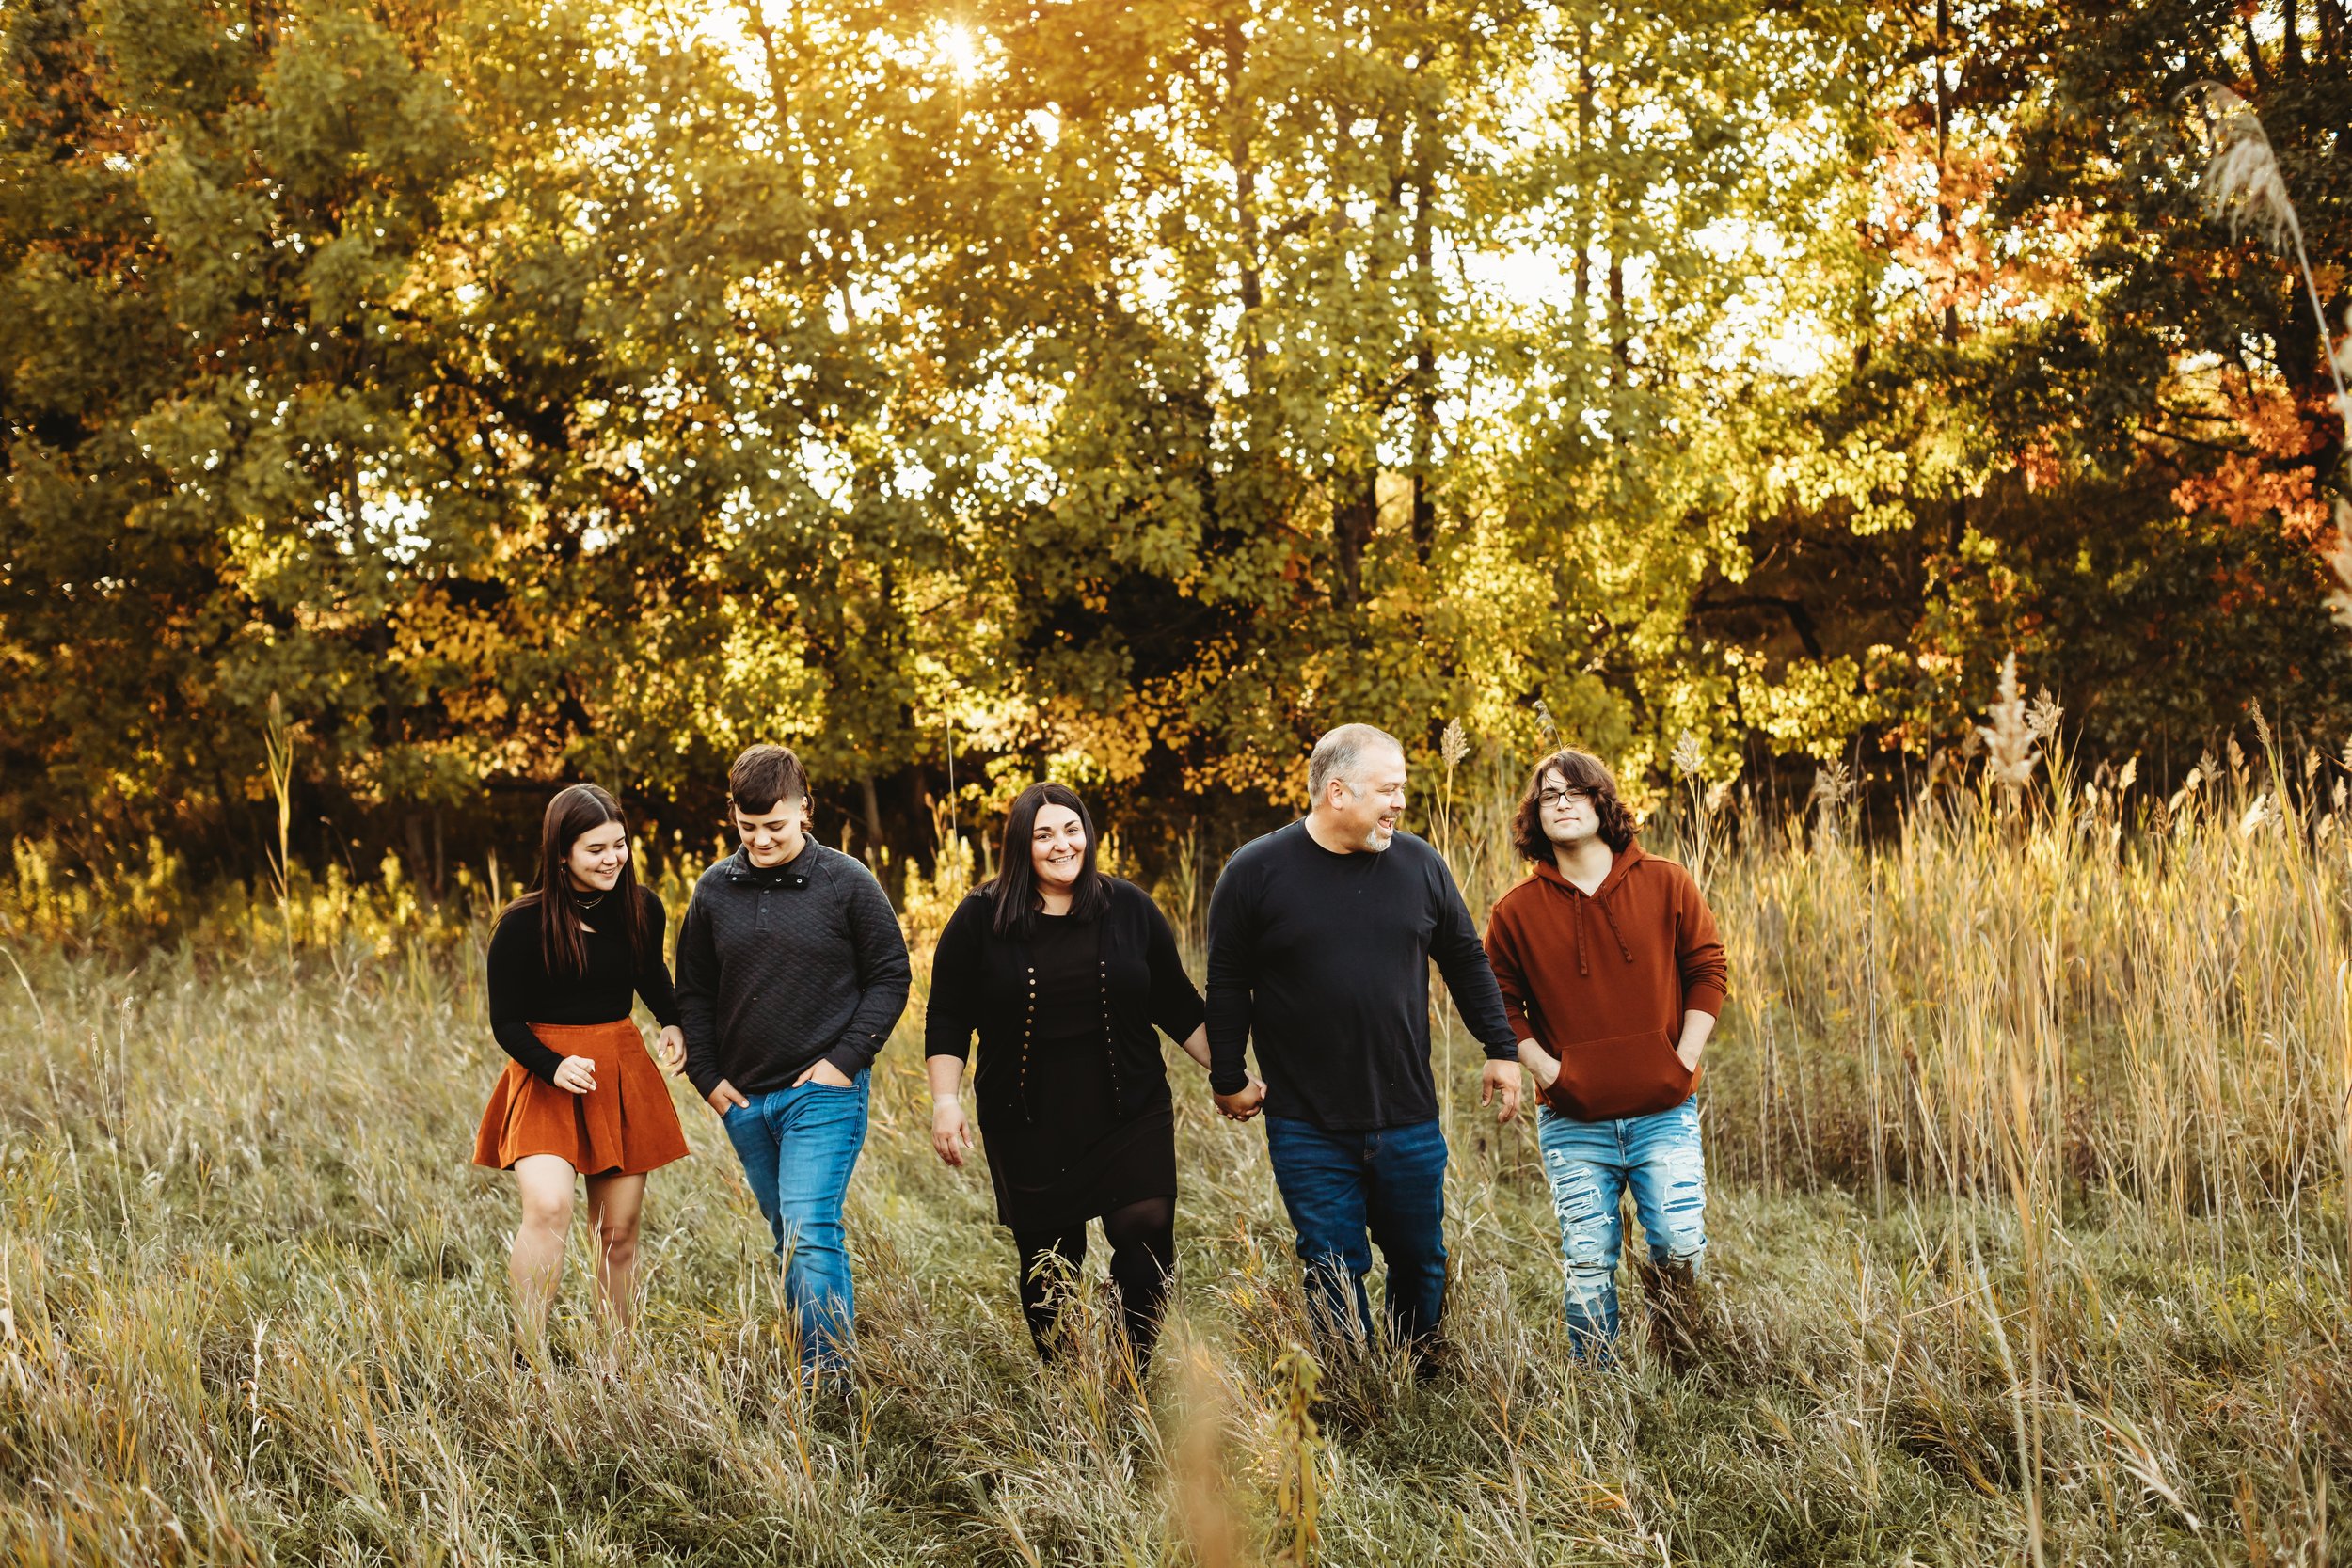  A family of five walks through tall yellow grass in Buffalo Rock, Illinois with Teala Ward Photography at sunset. family portraits with warm lighting and green trees #TealaWardPhotography #TealaWardFamilies #Outdoorfamilyportraits #IllinoisPhotograp